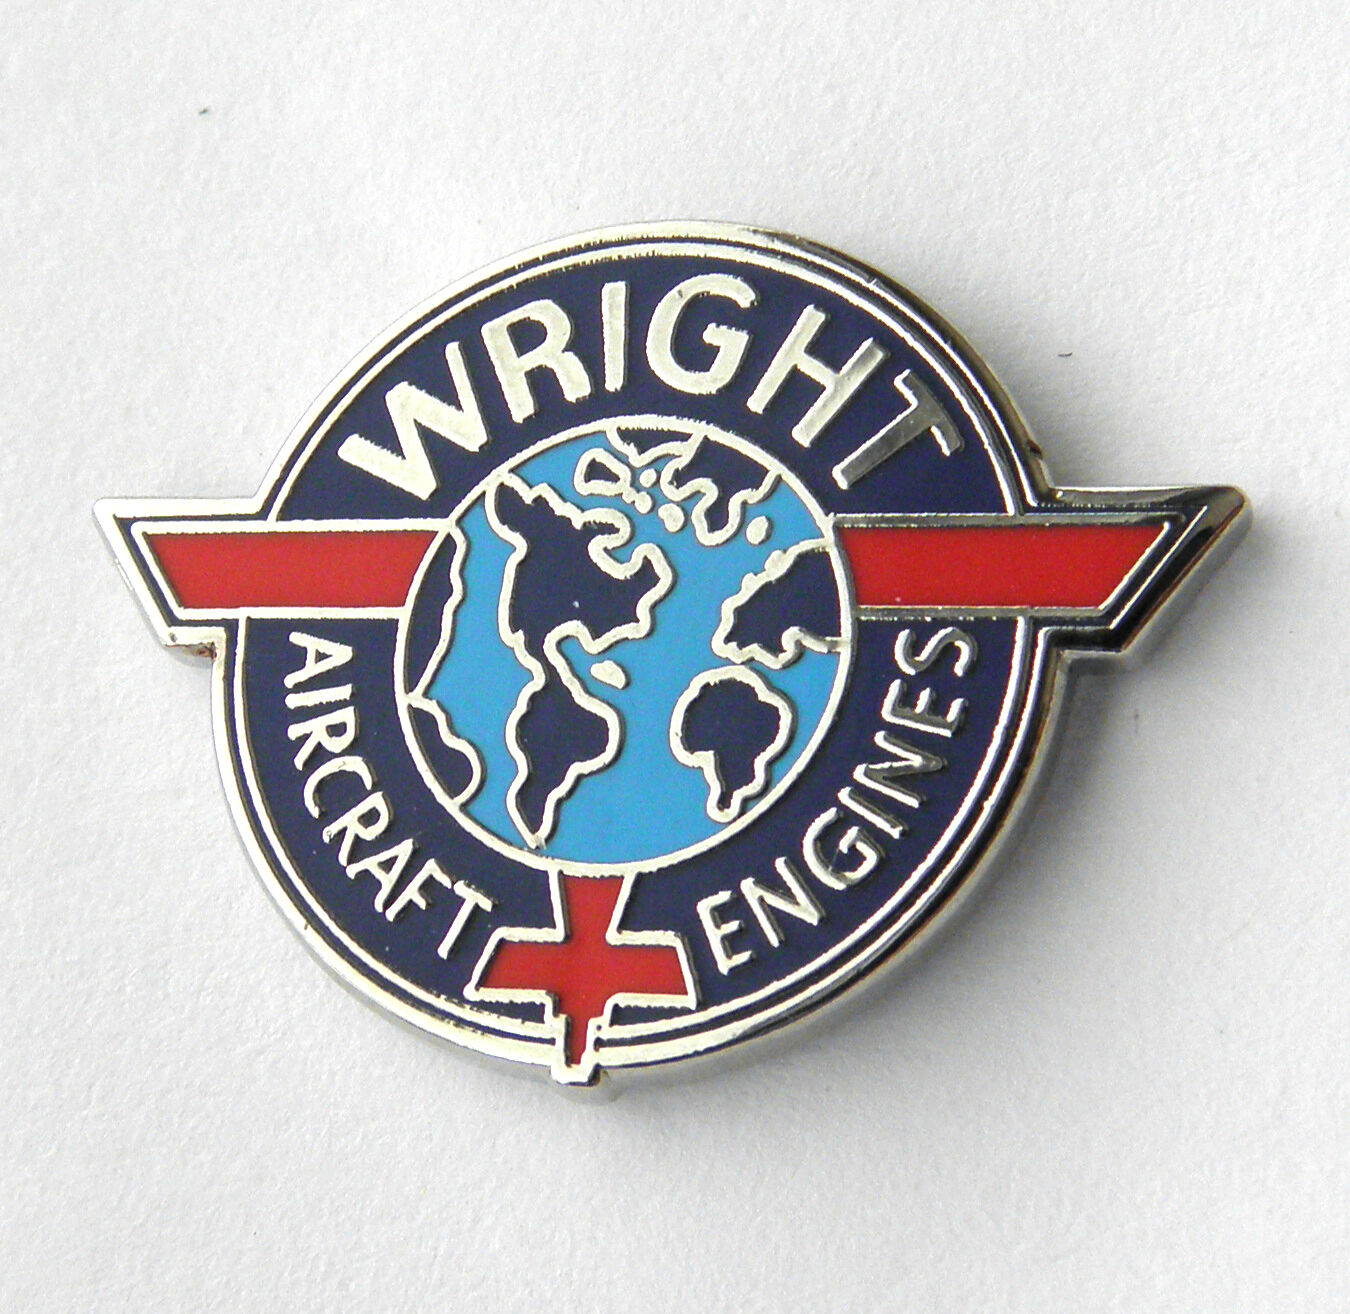 WRIGHT AIRCRAFT ENGINES AVIATION LAPEL PIN BADGE 3/4 INCH